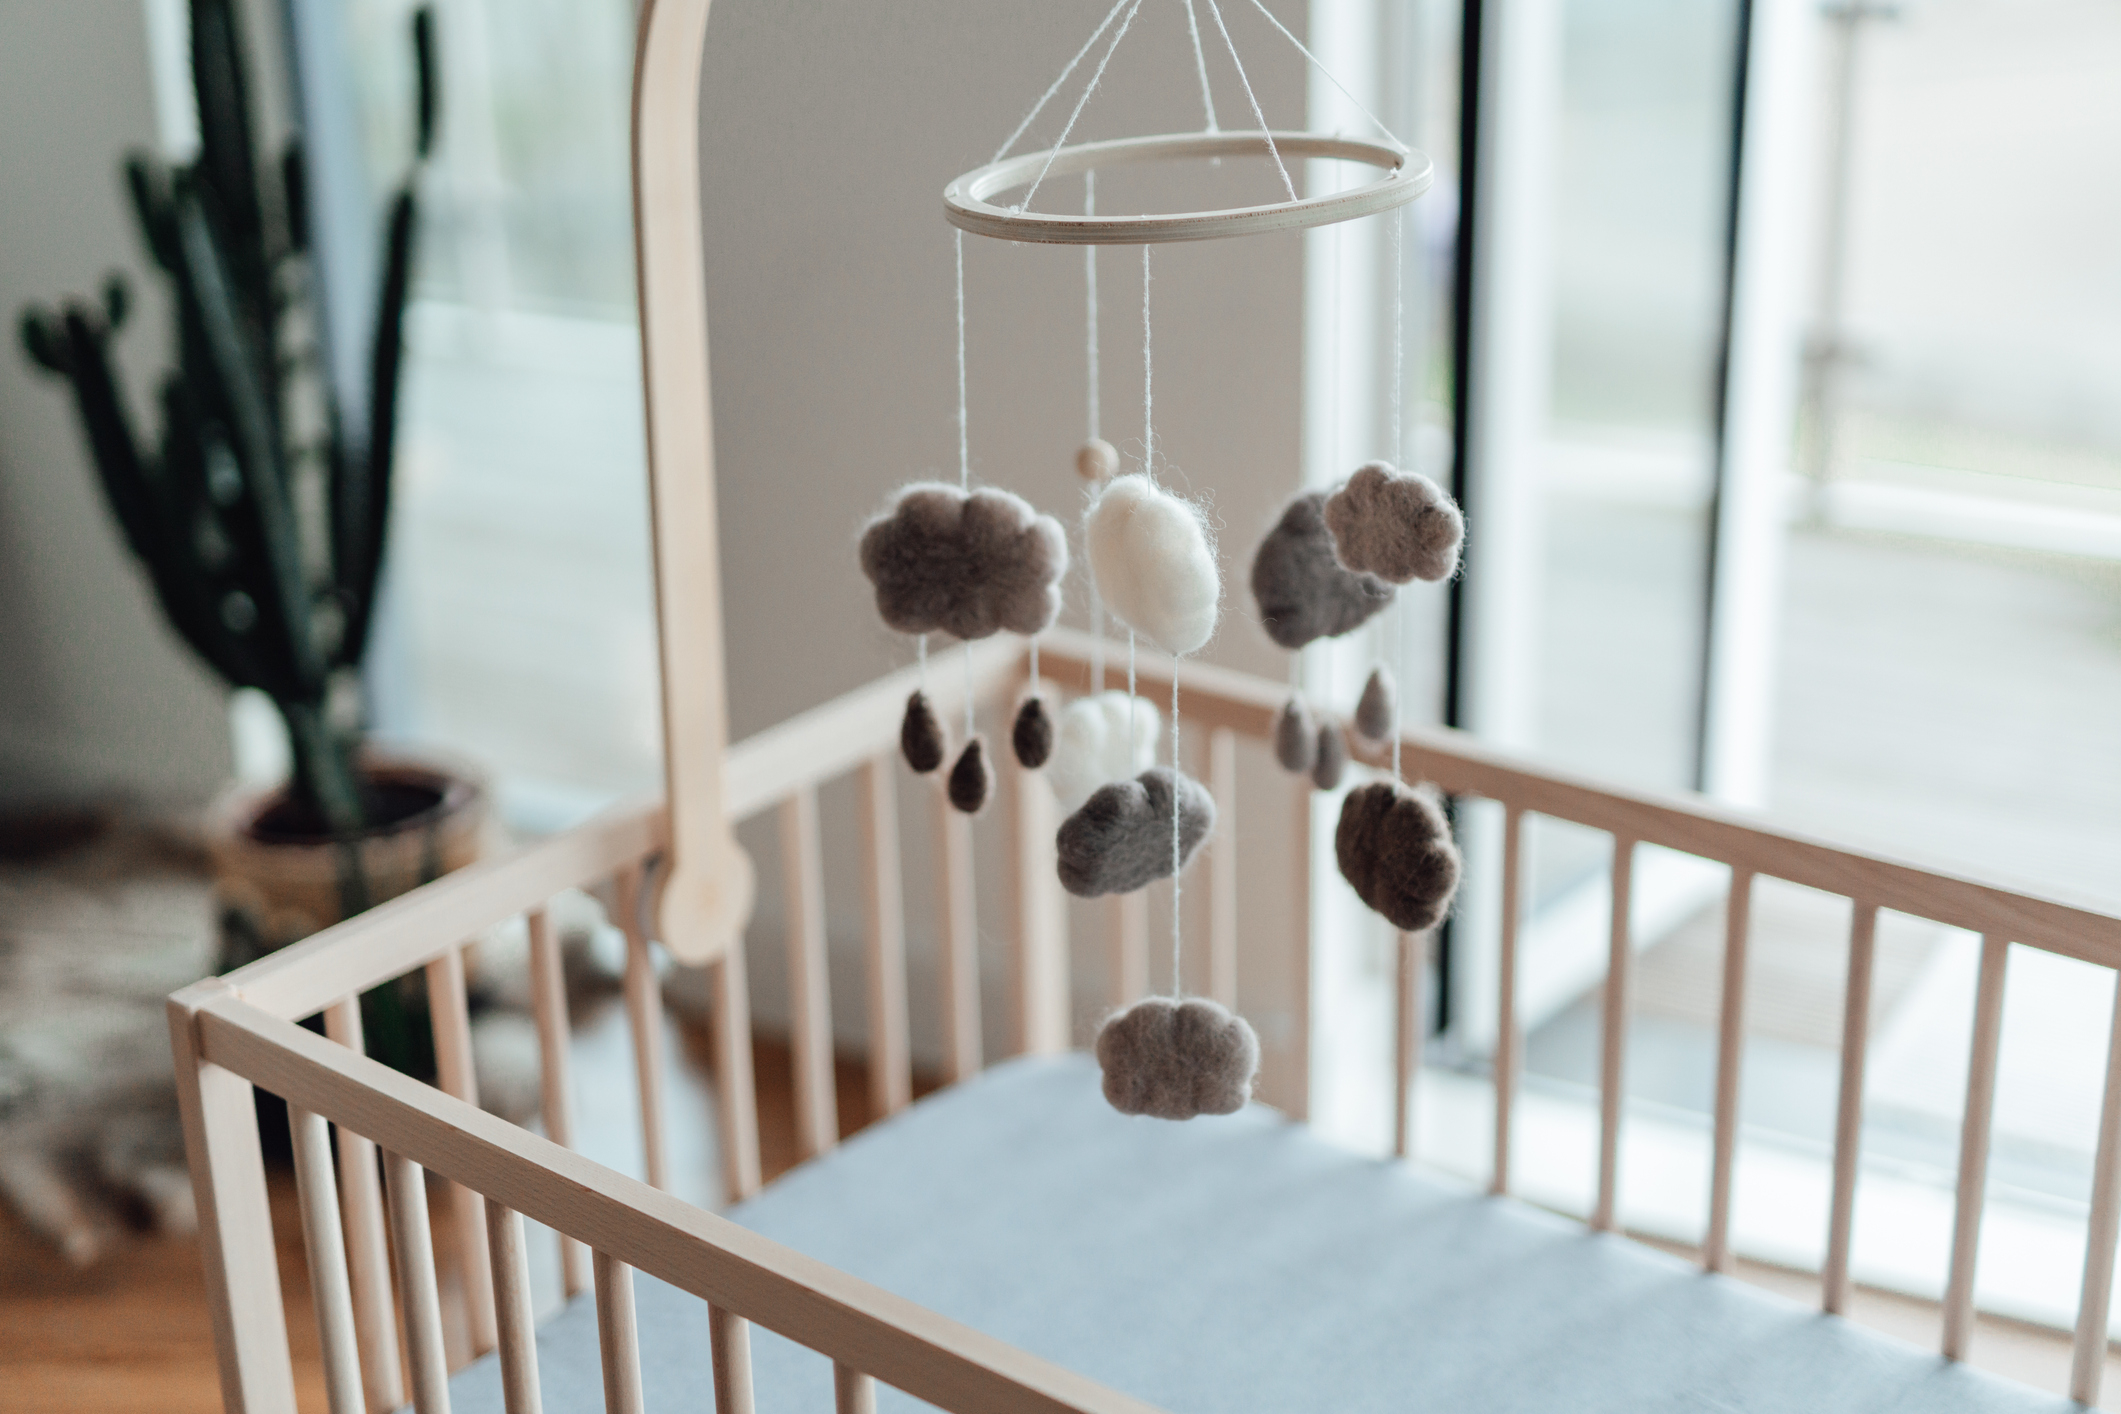 A baby&#x27;s crib bathed in light with a mobile hanging overhead